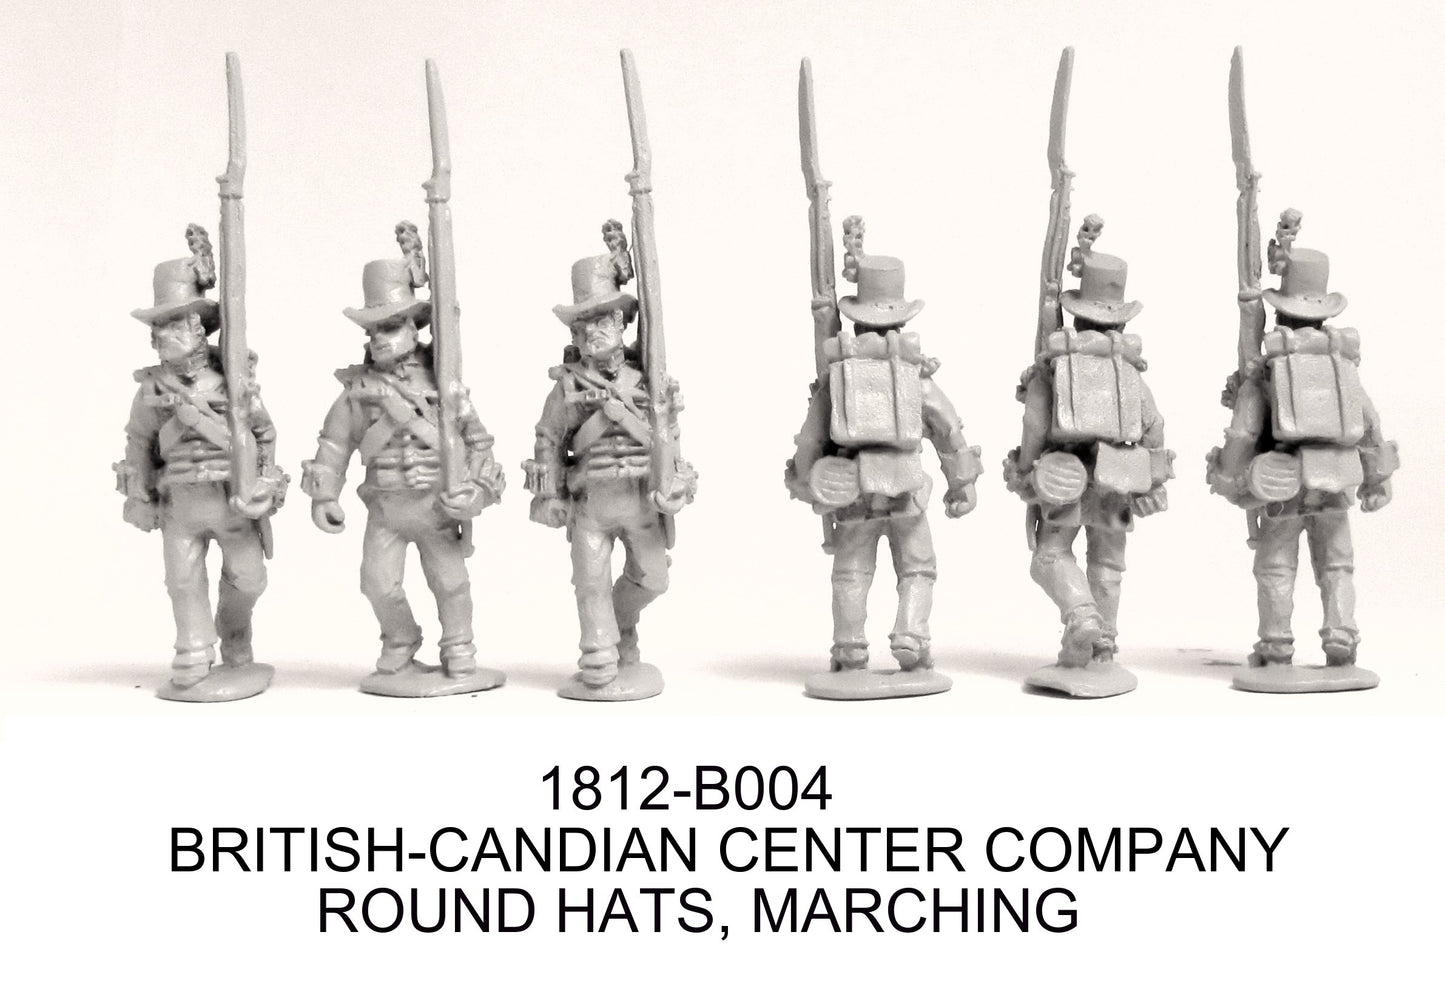 British-Canadian Round Hats Marching